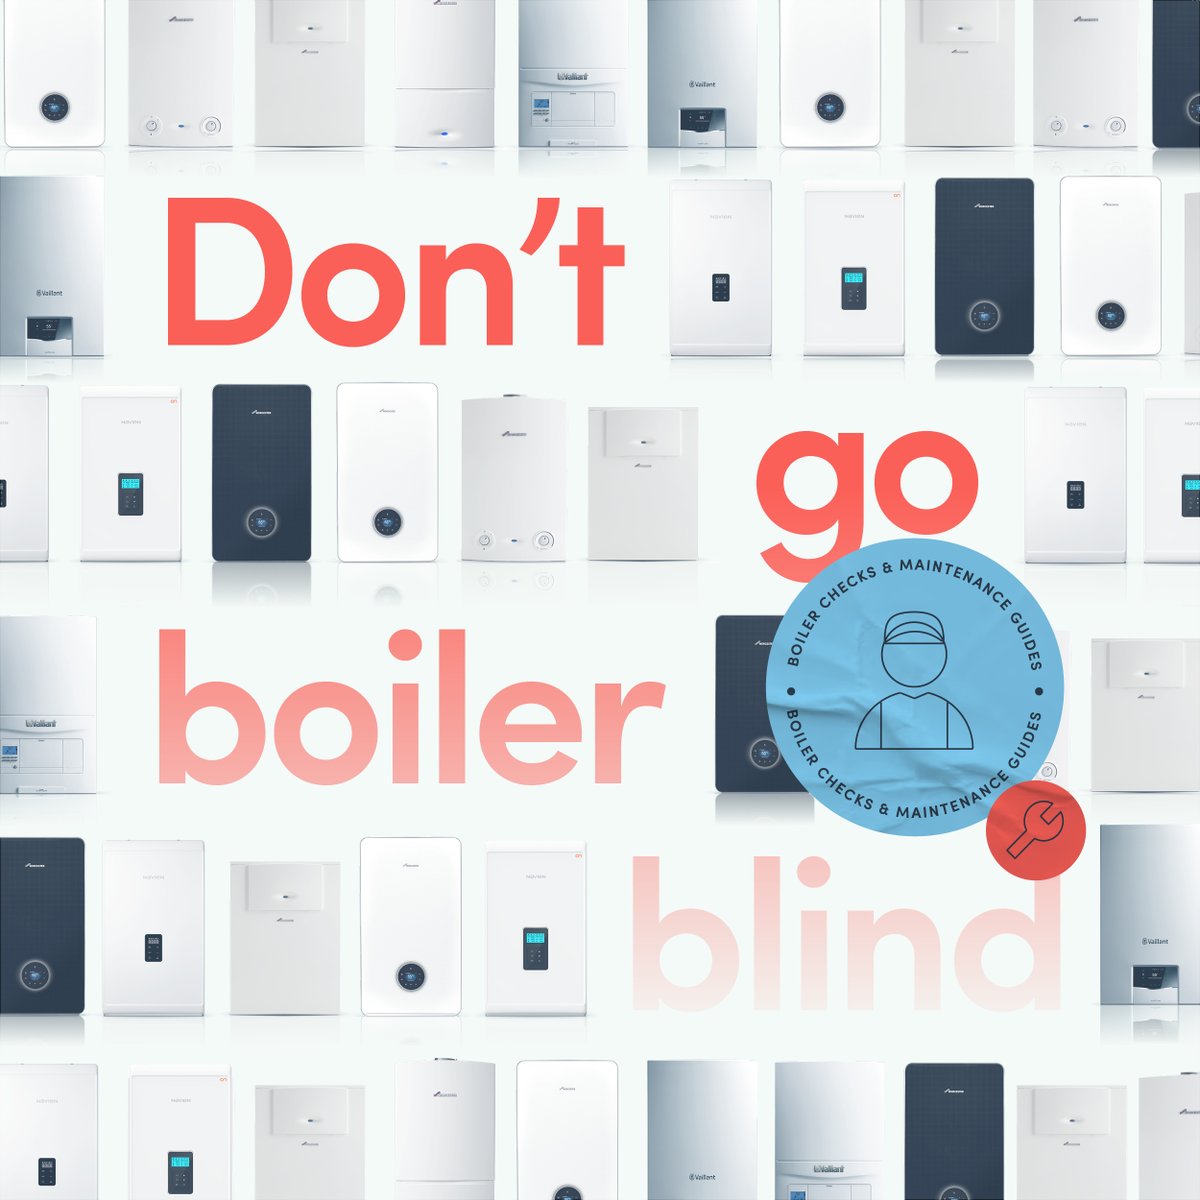 After a long winter, we know you’ll want to forget about your heating and boiler for a while! BUT, it’s important to think ahead and carry out essential boiler maintenance, including booking your annual service. Here's our top tips: bit.ly/3w6mCrJ